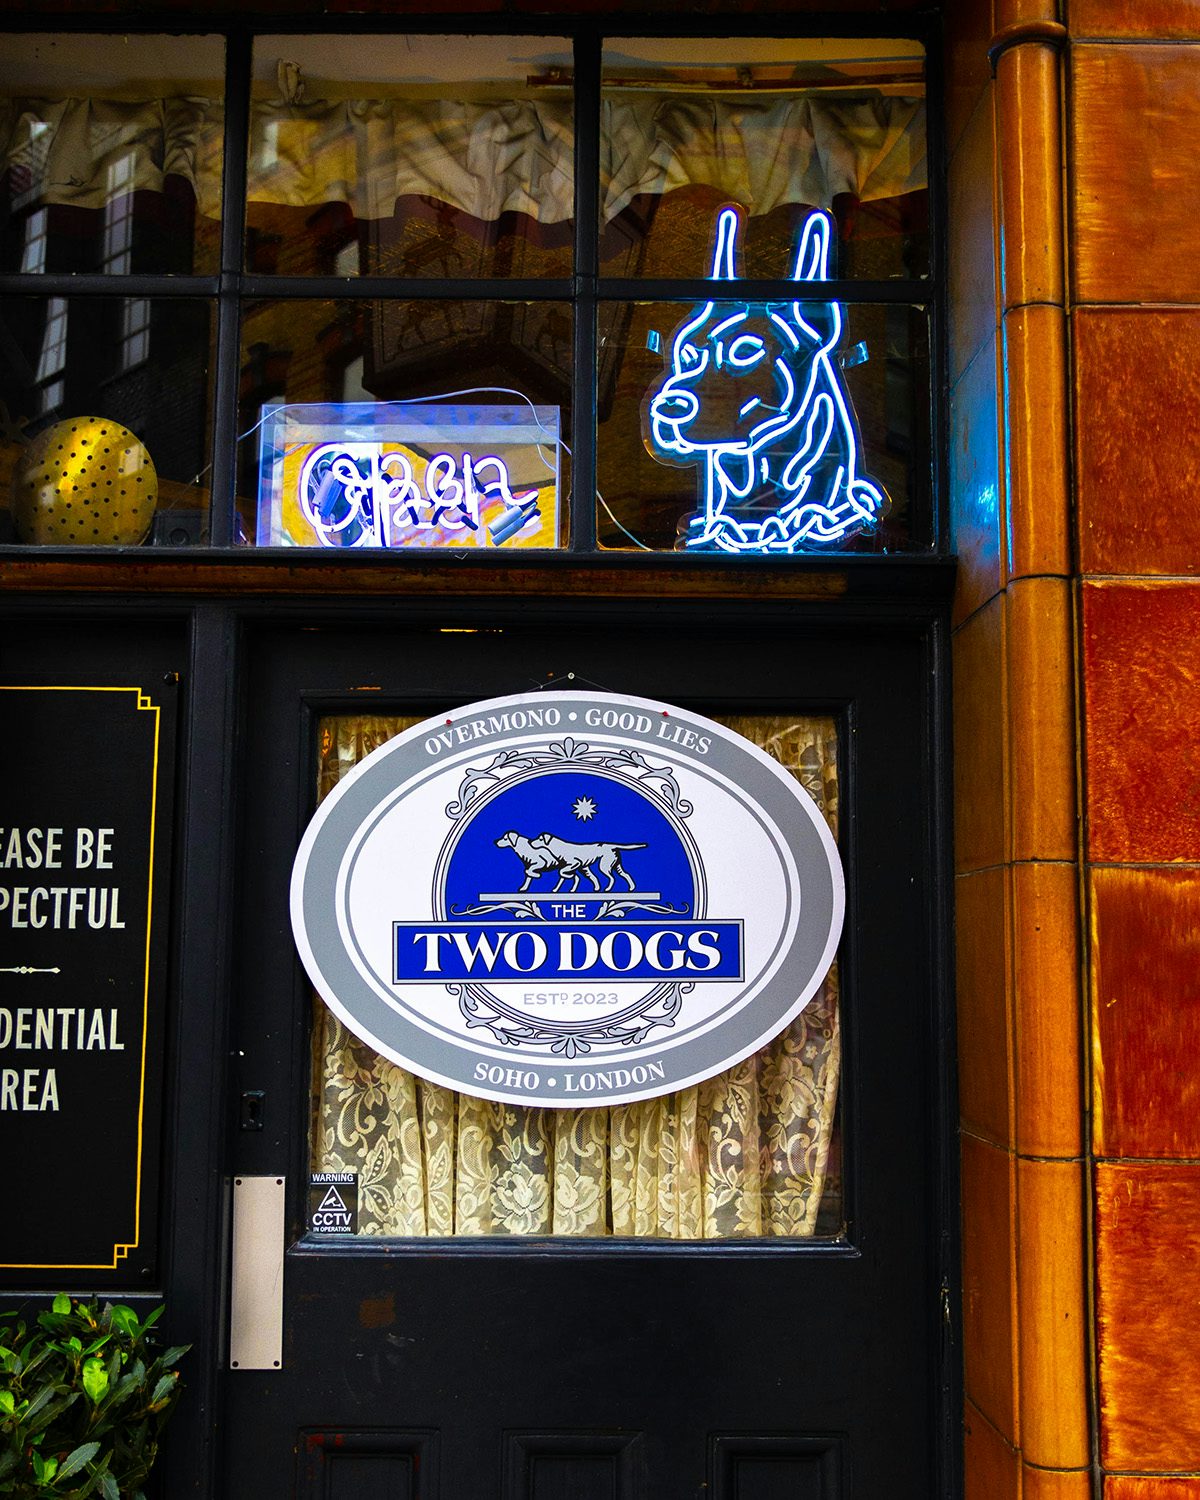 Image shows the an oval poster featuring two illustrated Dobermanns and labelled The Two Dogs, as well as neon lighting in the shape of a dog's head, in the window of Overmono's pop up pub